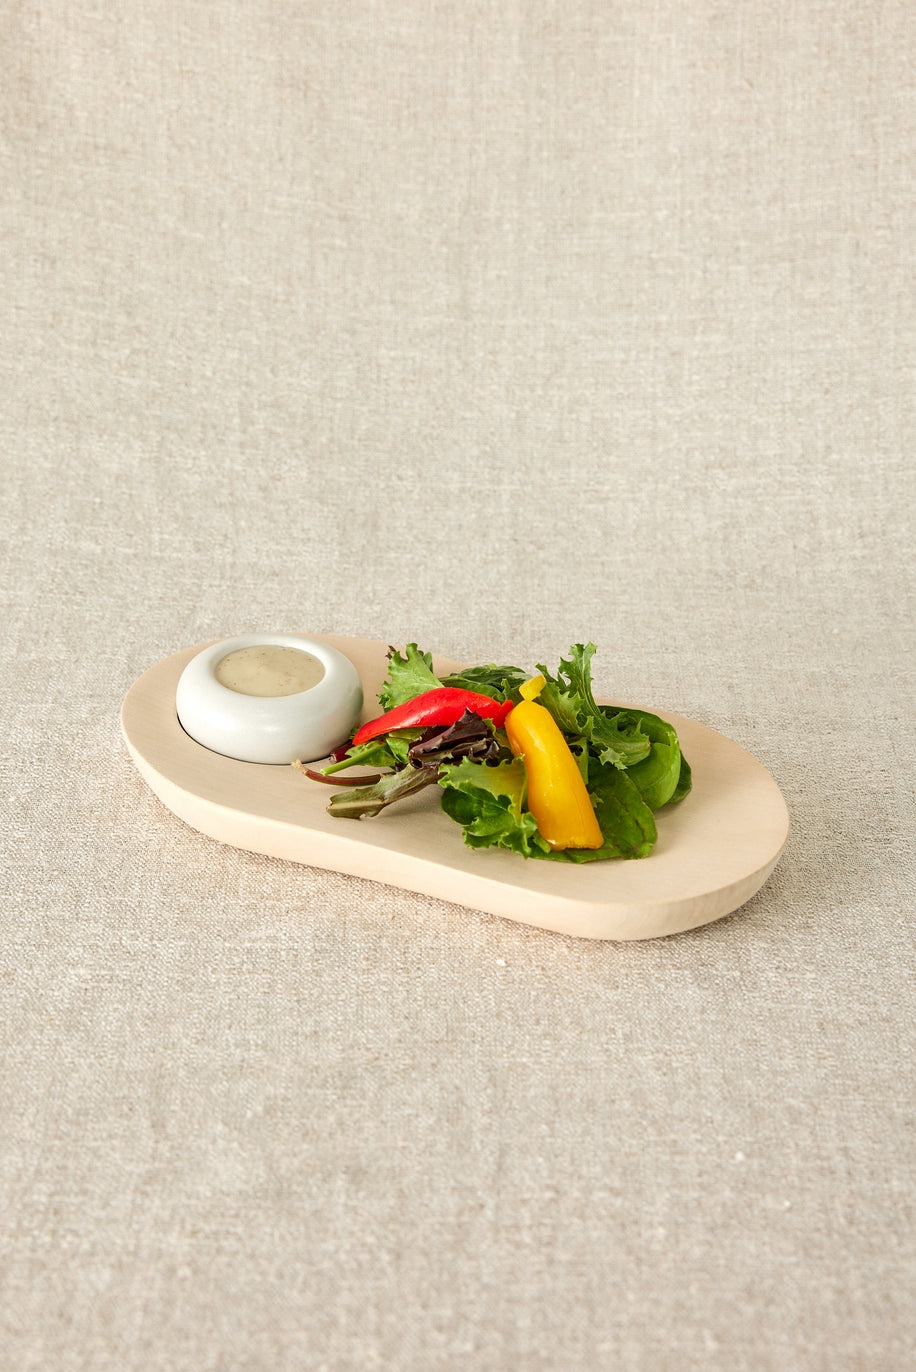 This wooden plate, thoughtfully shaped by hand, boasts organic edges for a unique touch and is accompanied by a pristine white ceramic bowl. With its rustic charm this versatile plate effortlessly doubles as a charming side dish or centerpiece. Handmade in South Africa.